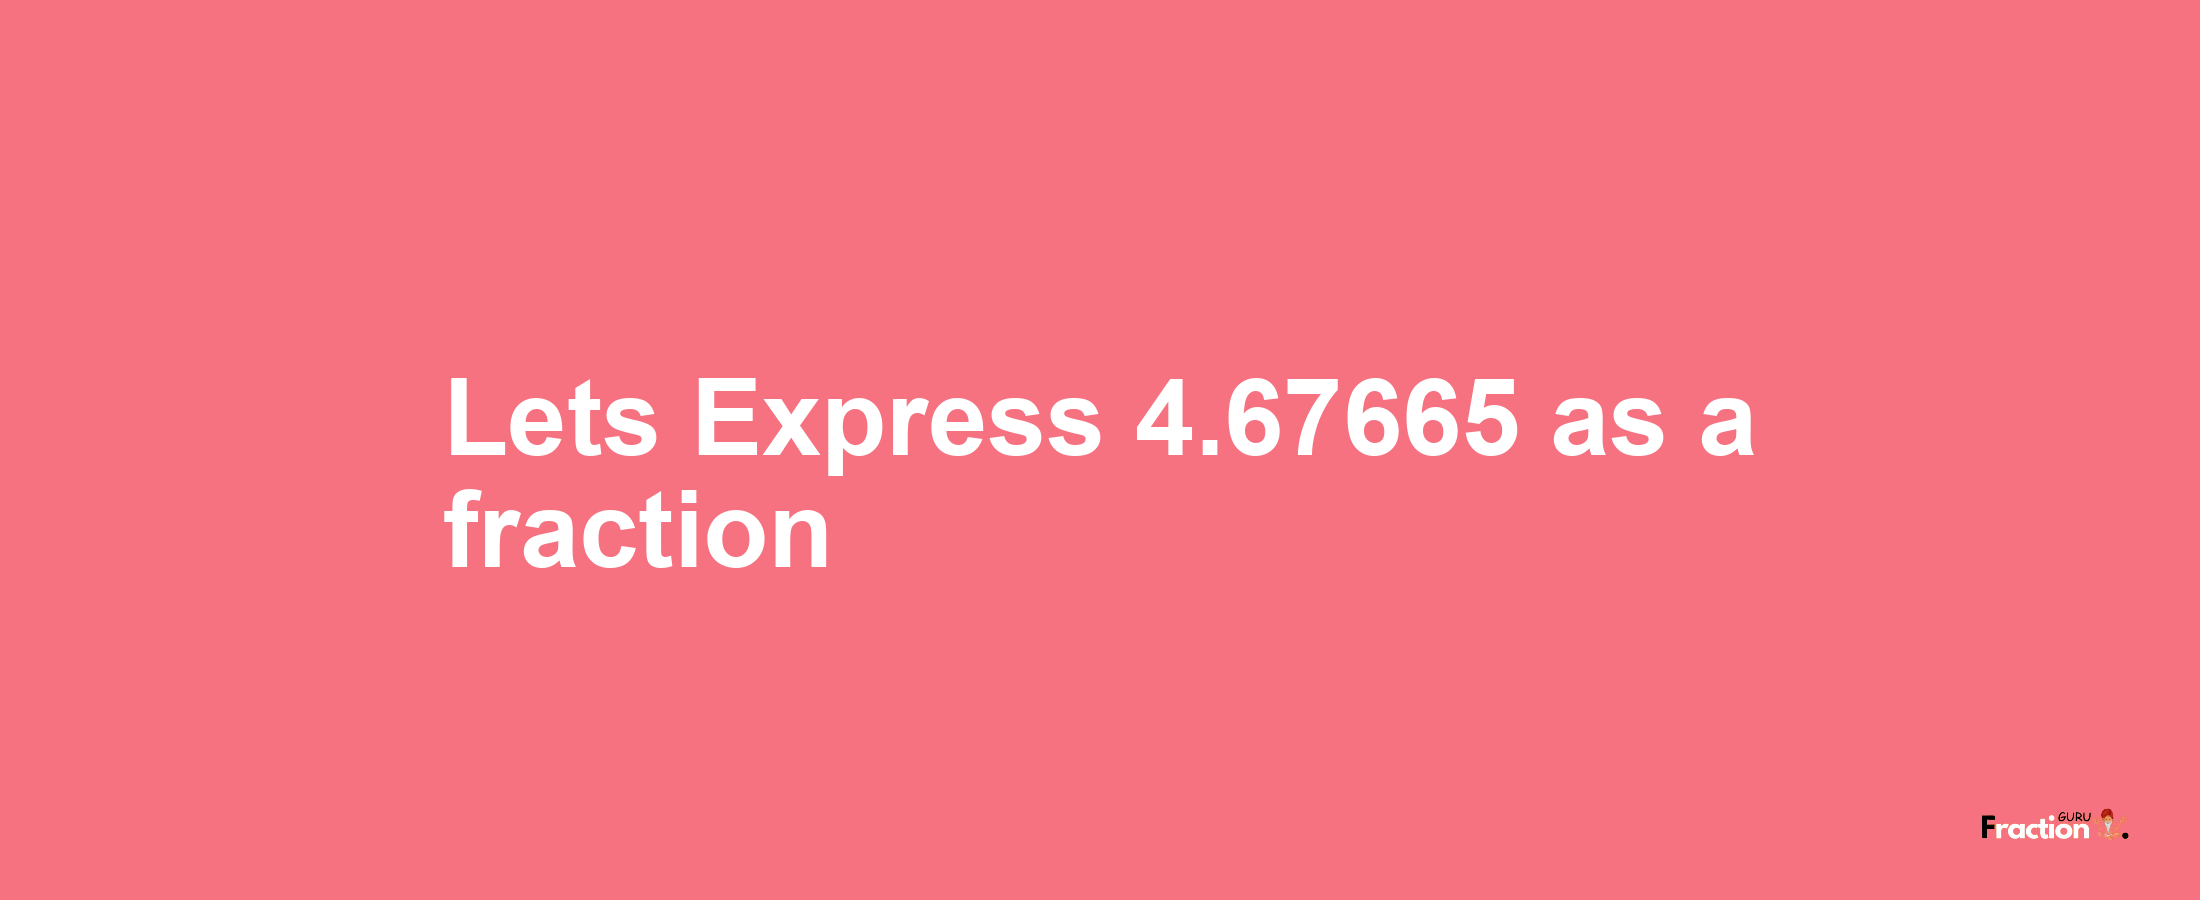 Lets Express 4.67665 as afraction